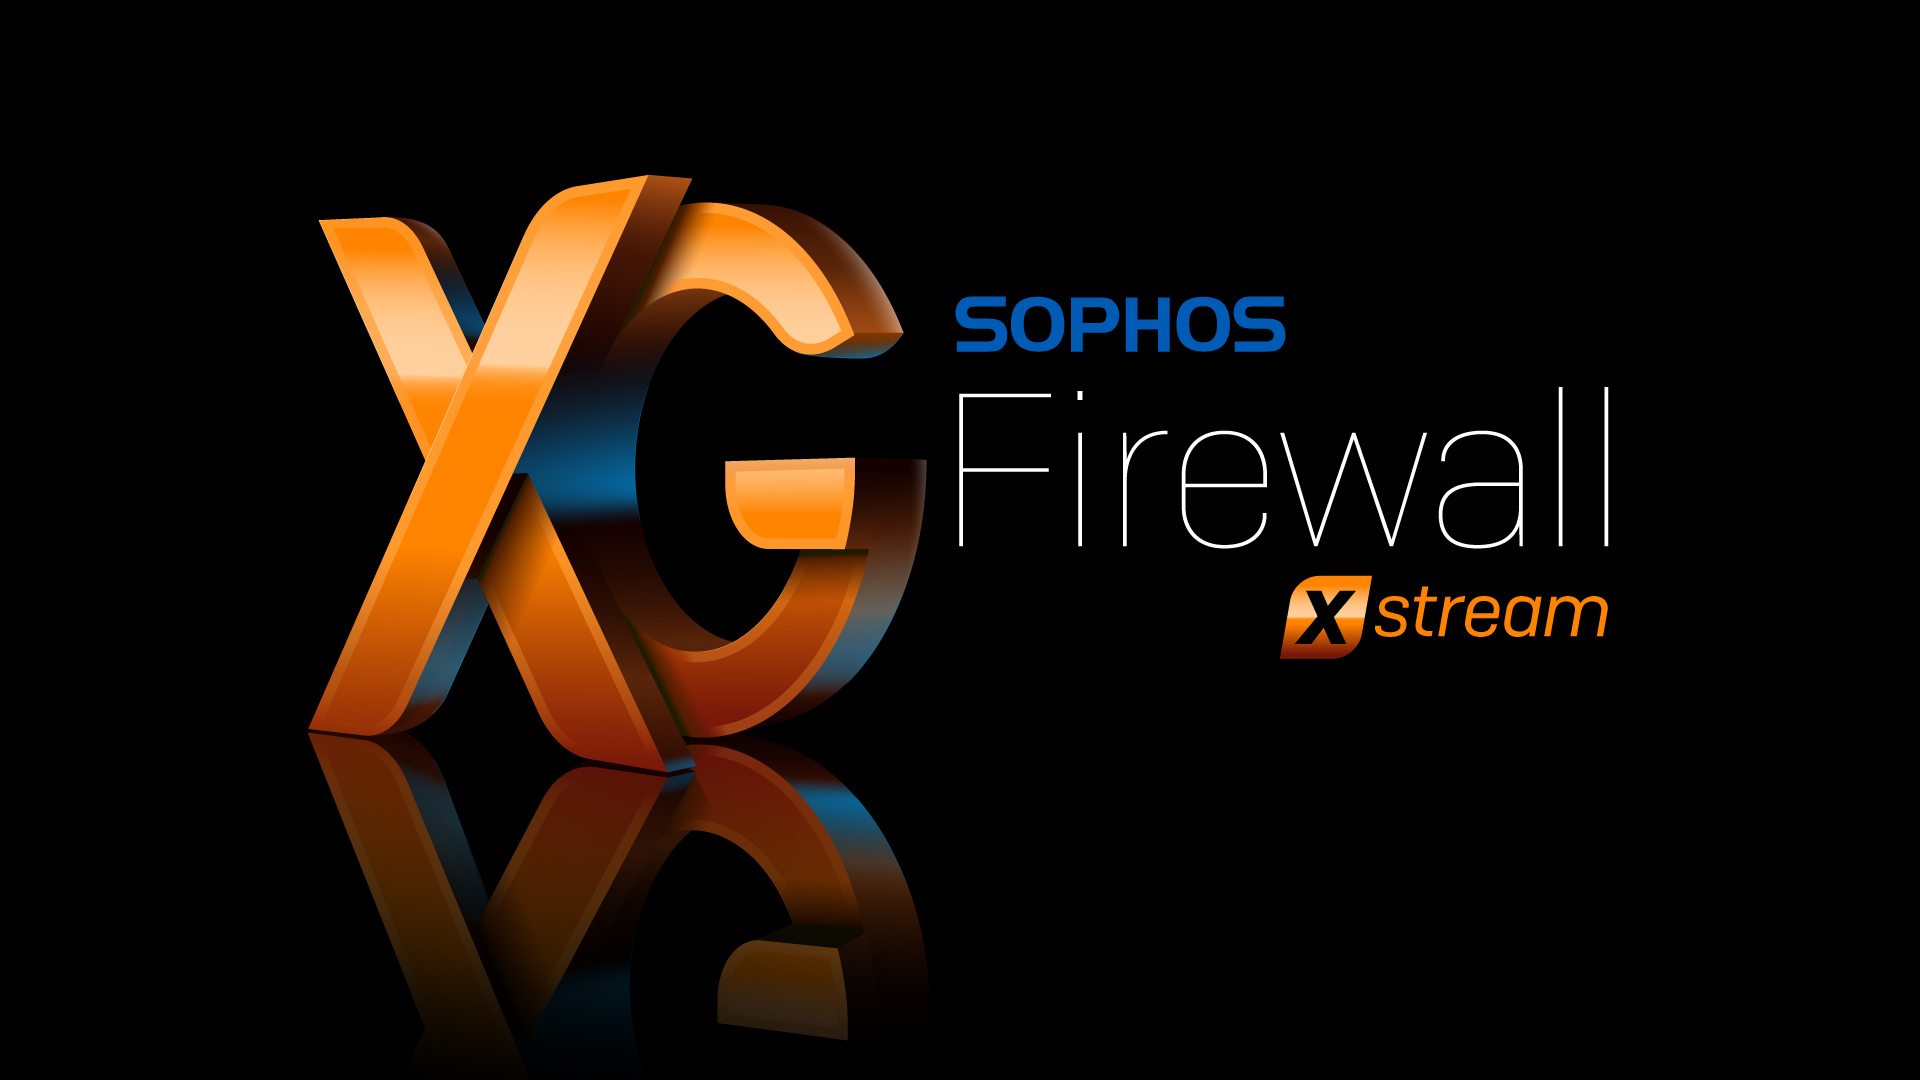 Sophos XG Firewall v18 is now available! - Release Notes & News - Sophos Firewall - Sophos Community